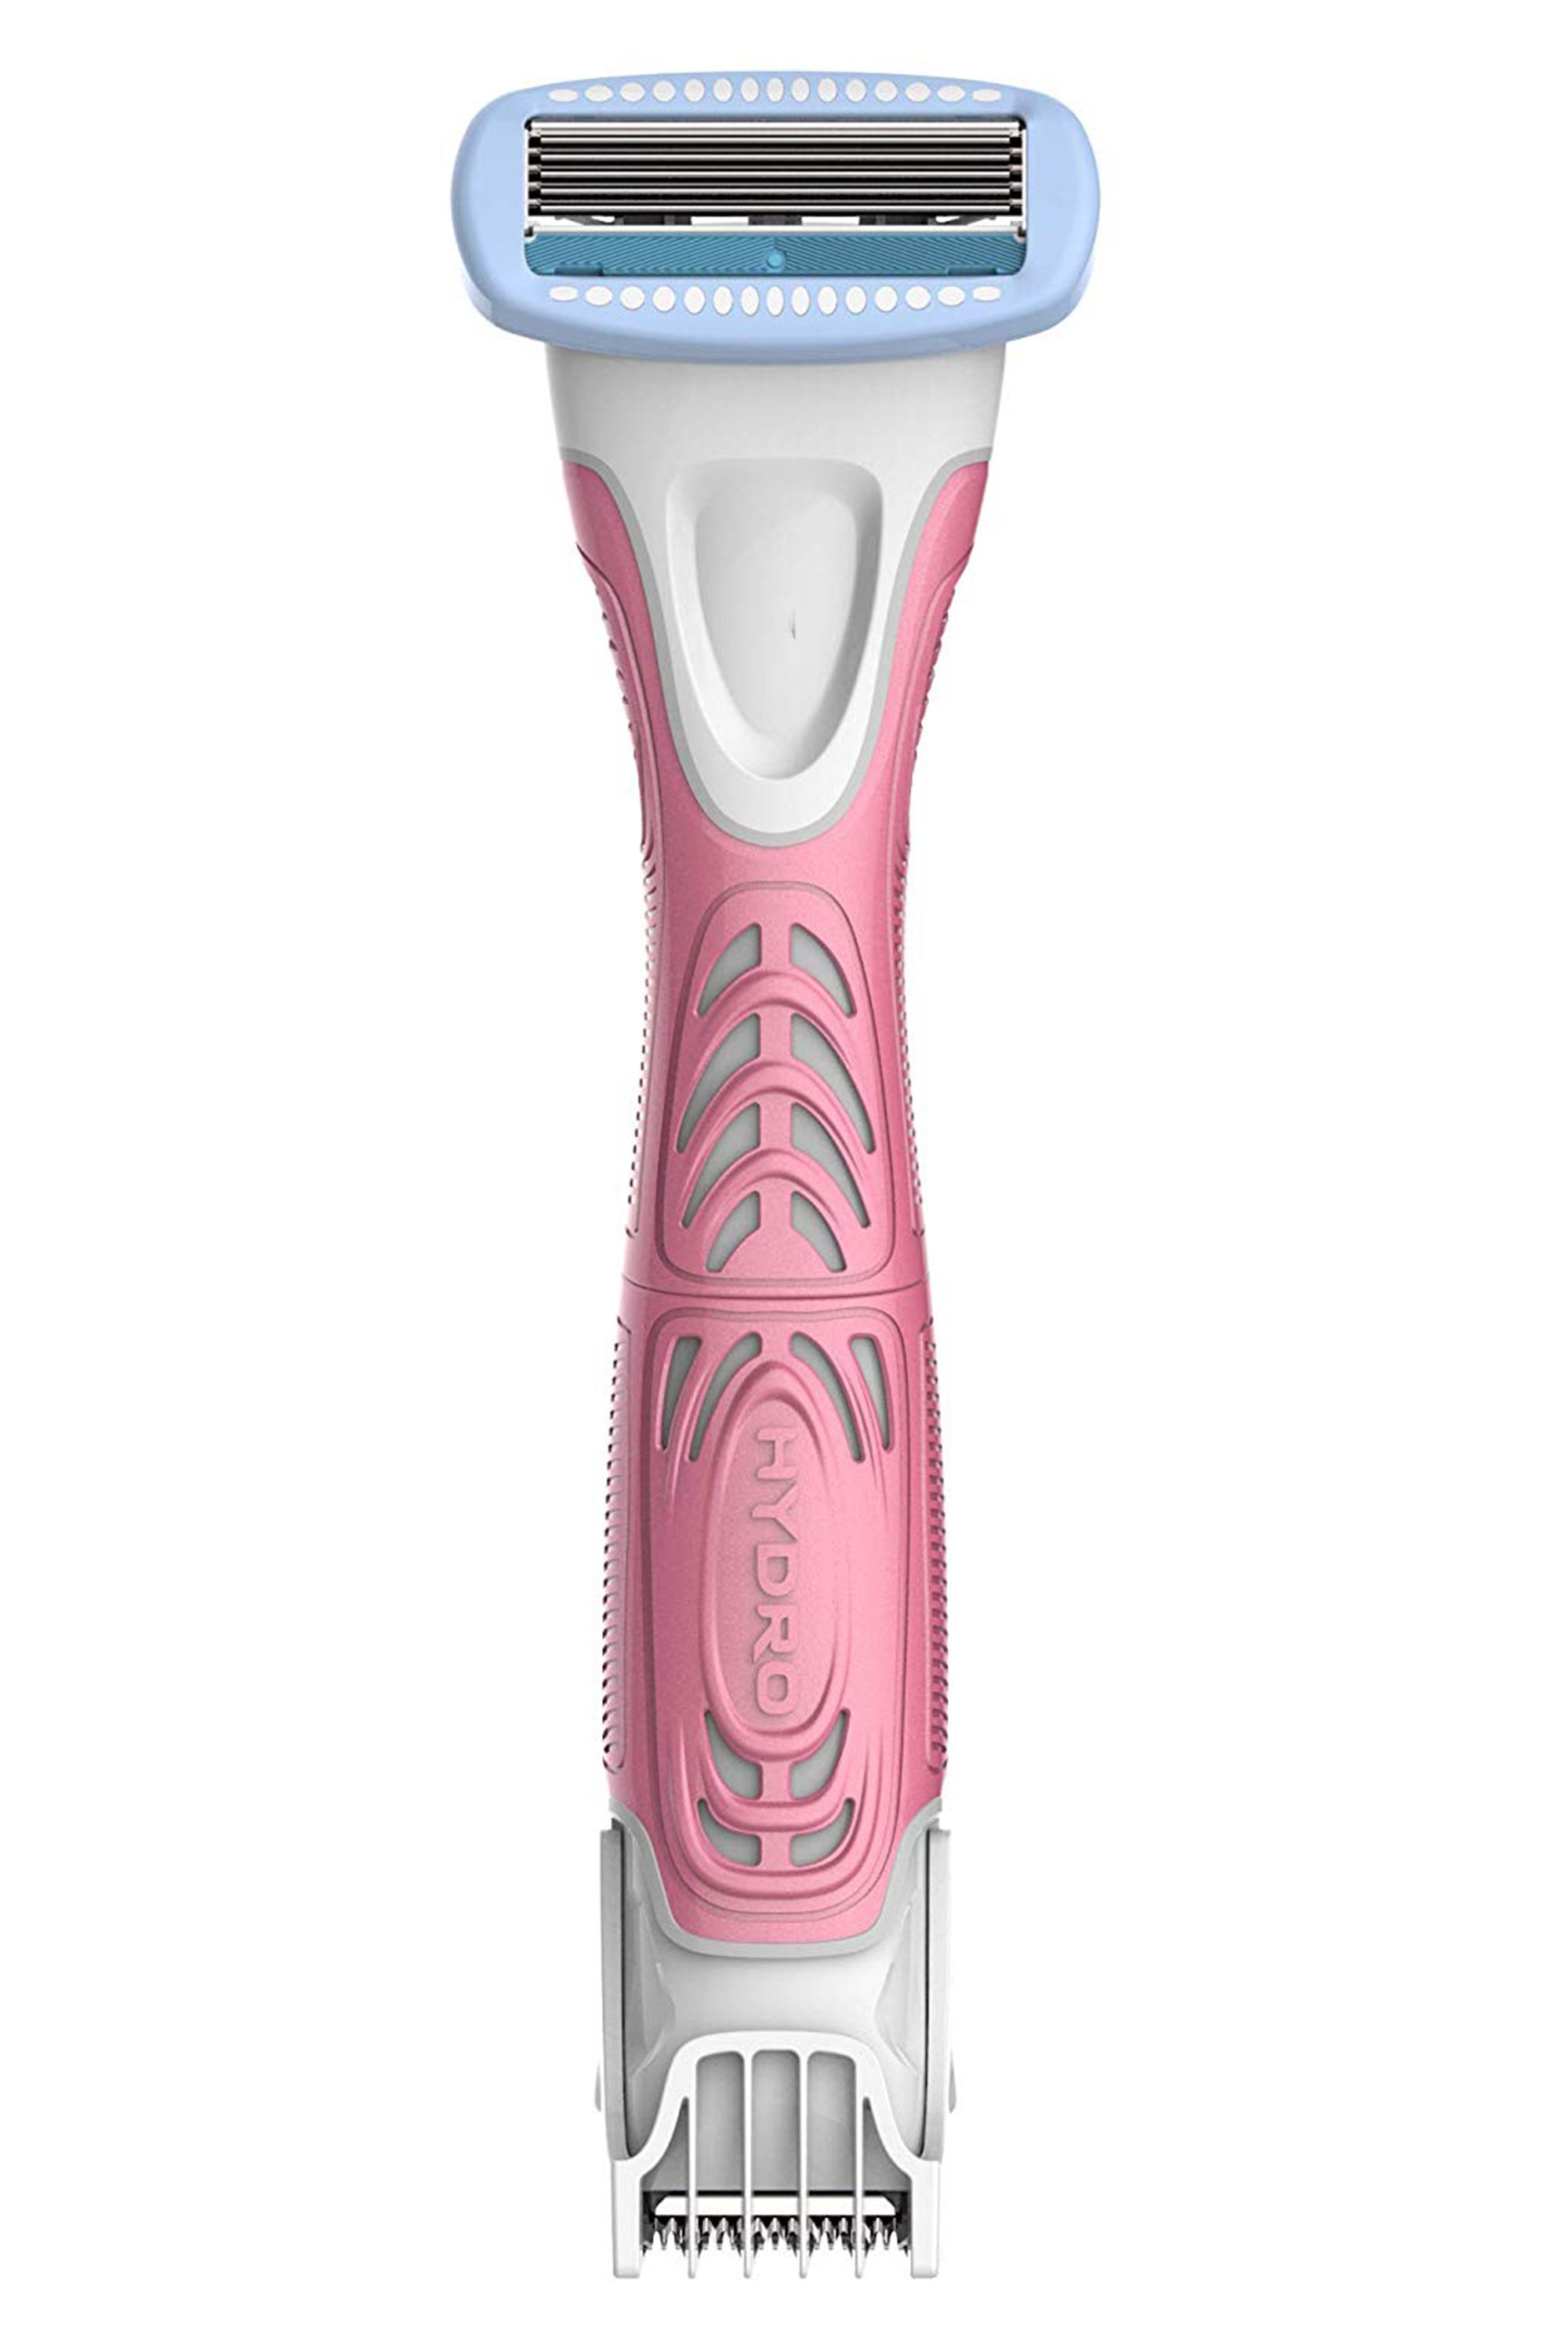 bikini perfect women's rechargeable electric trimmer